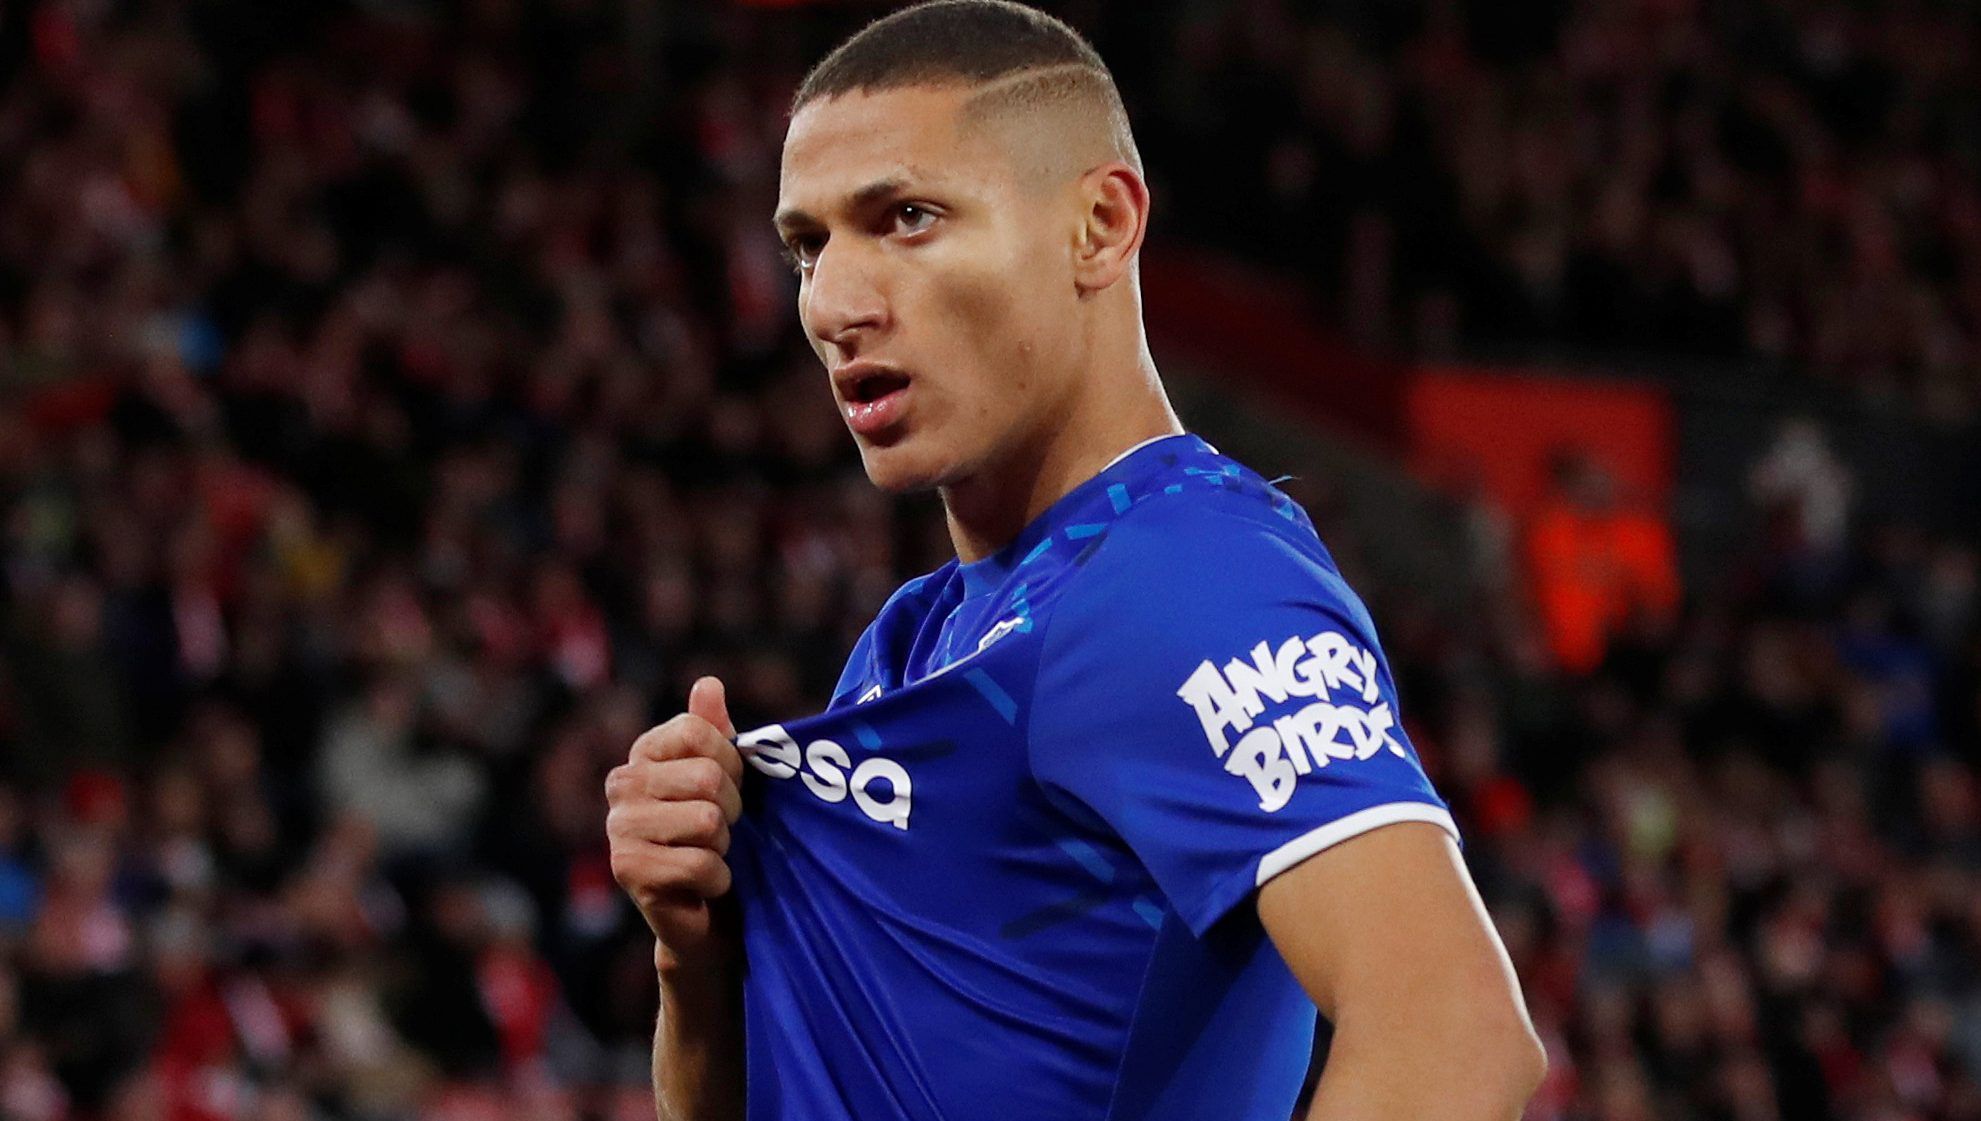 Soccer Football - Premier League - Southampton v Everton - St Mary's Stadium, Southampton, Britain - November 9, 2019  Everton's Richarlison celebrates scoring their second goal              REUTERS/David Klein  EDITORIAL USE ONLY. No use with unauthorized audio, video, data, fixture lists, club/league logos or 